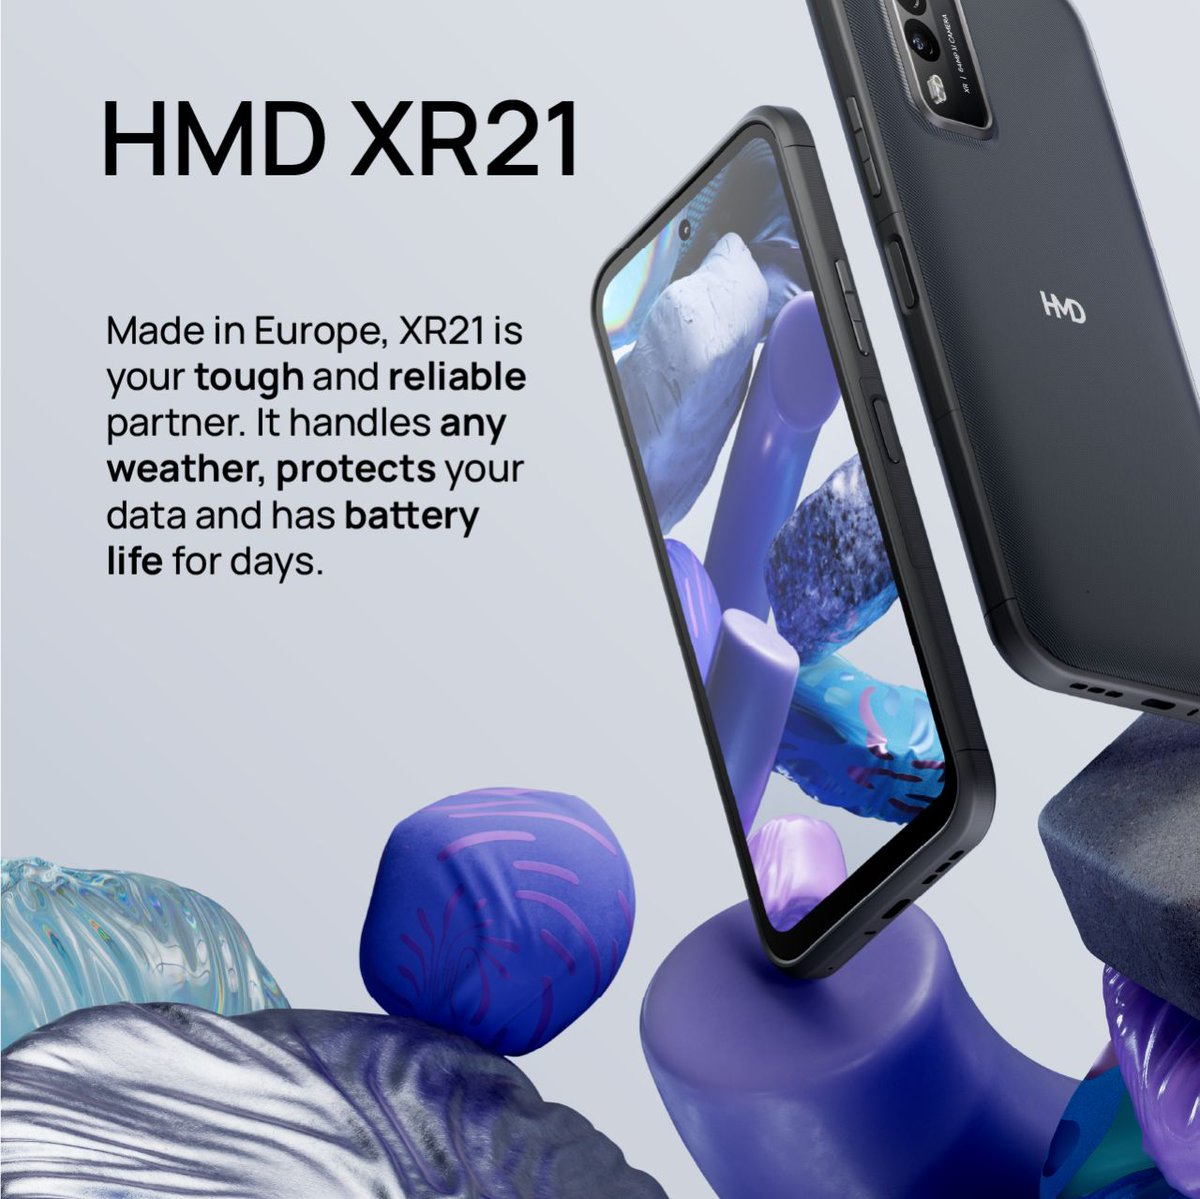 HMD XR21 and HMD T21 Tablet can now be purchased in several European markets

NOKIANEWS - News of the Nokia nokianews.net/HMD_XR21_and_H…